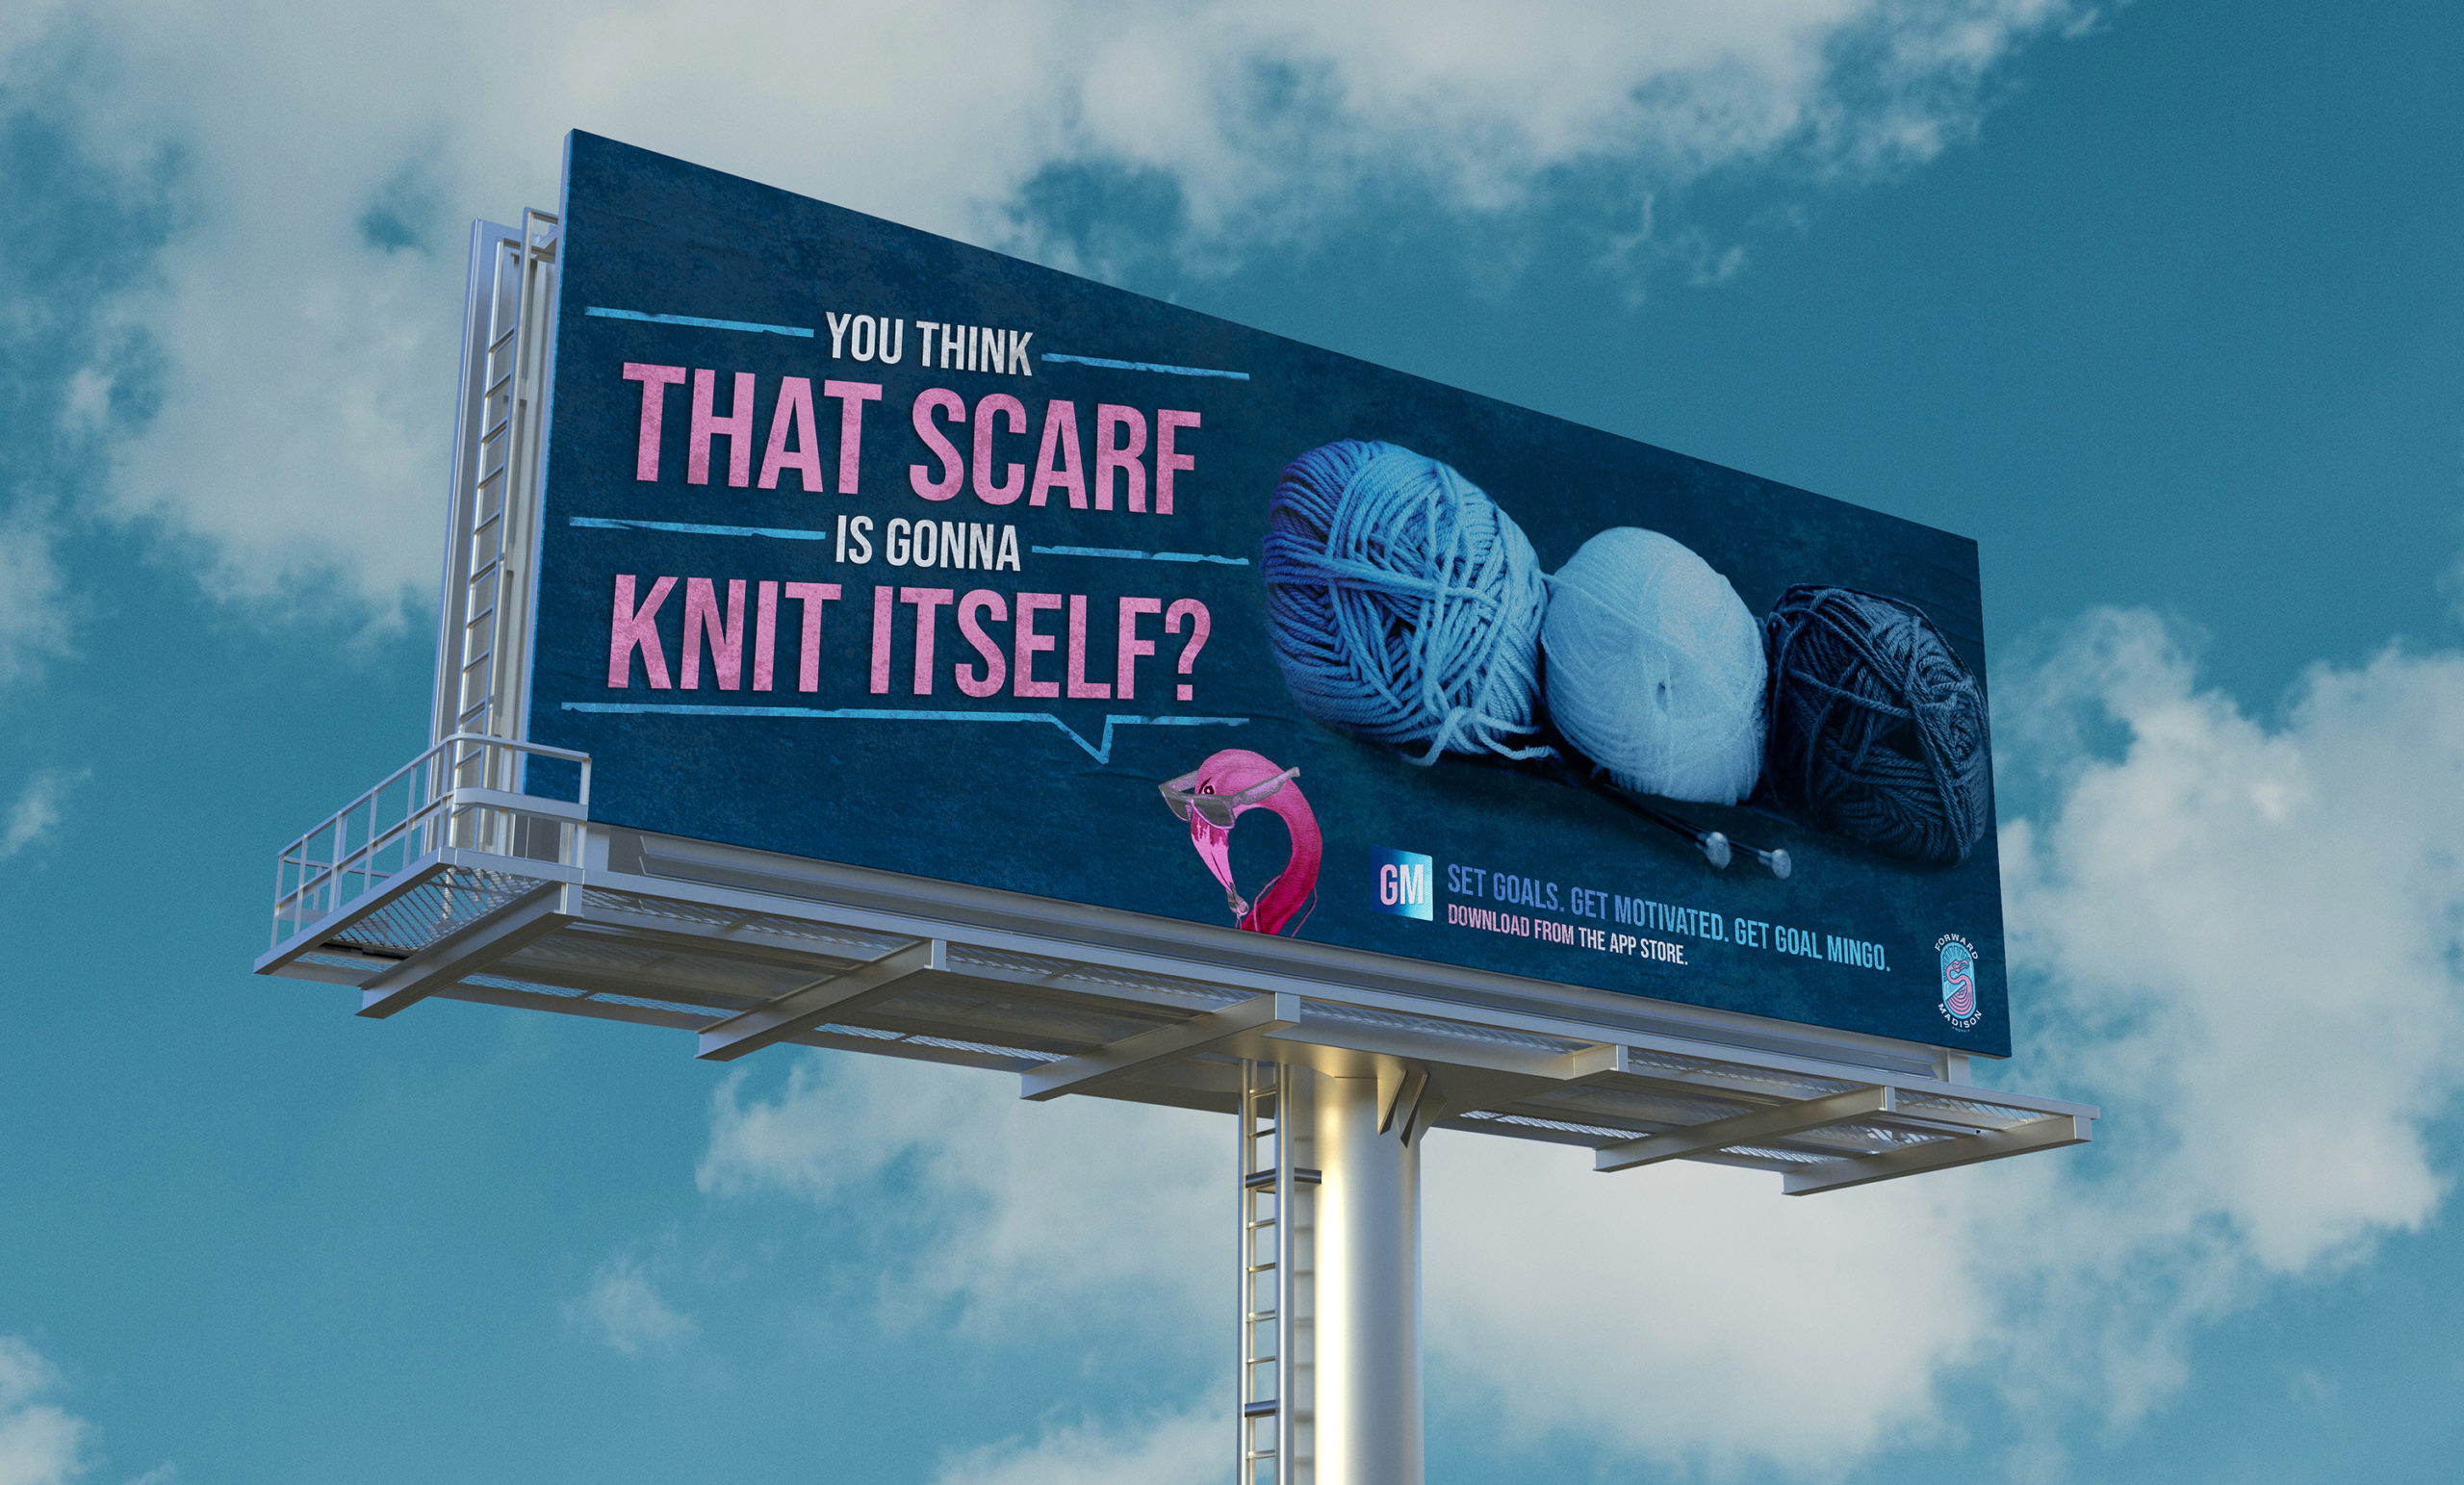 You think that scarf is gonna knit itself?